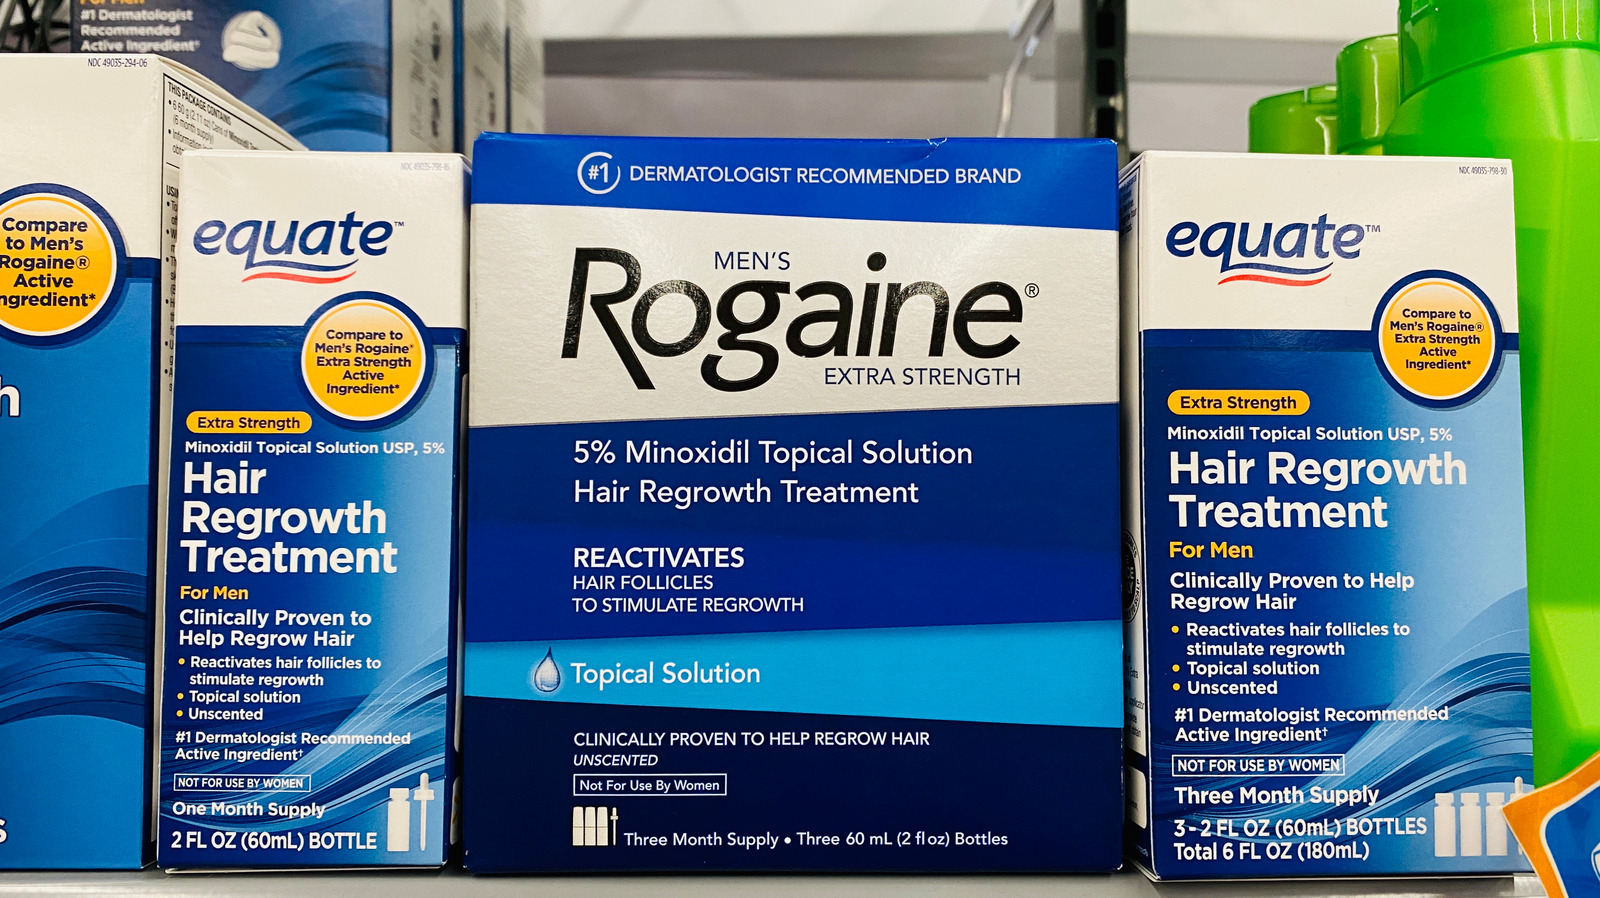 Can Women Use Rogaine?